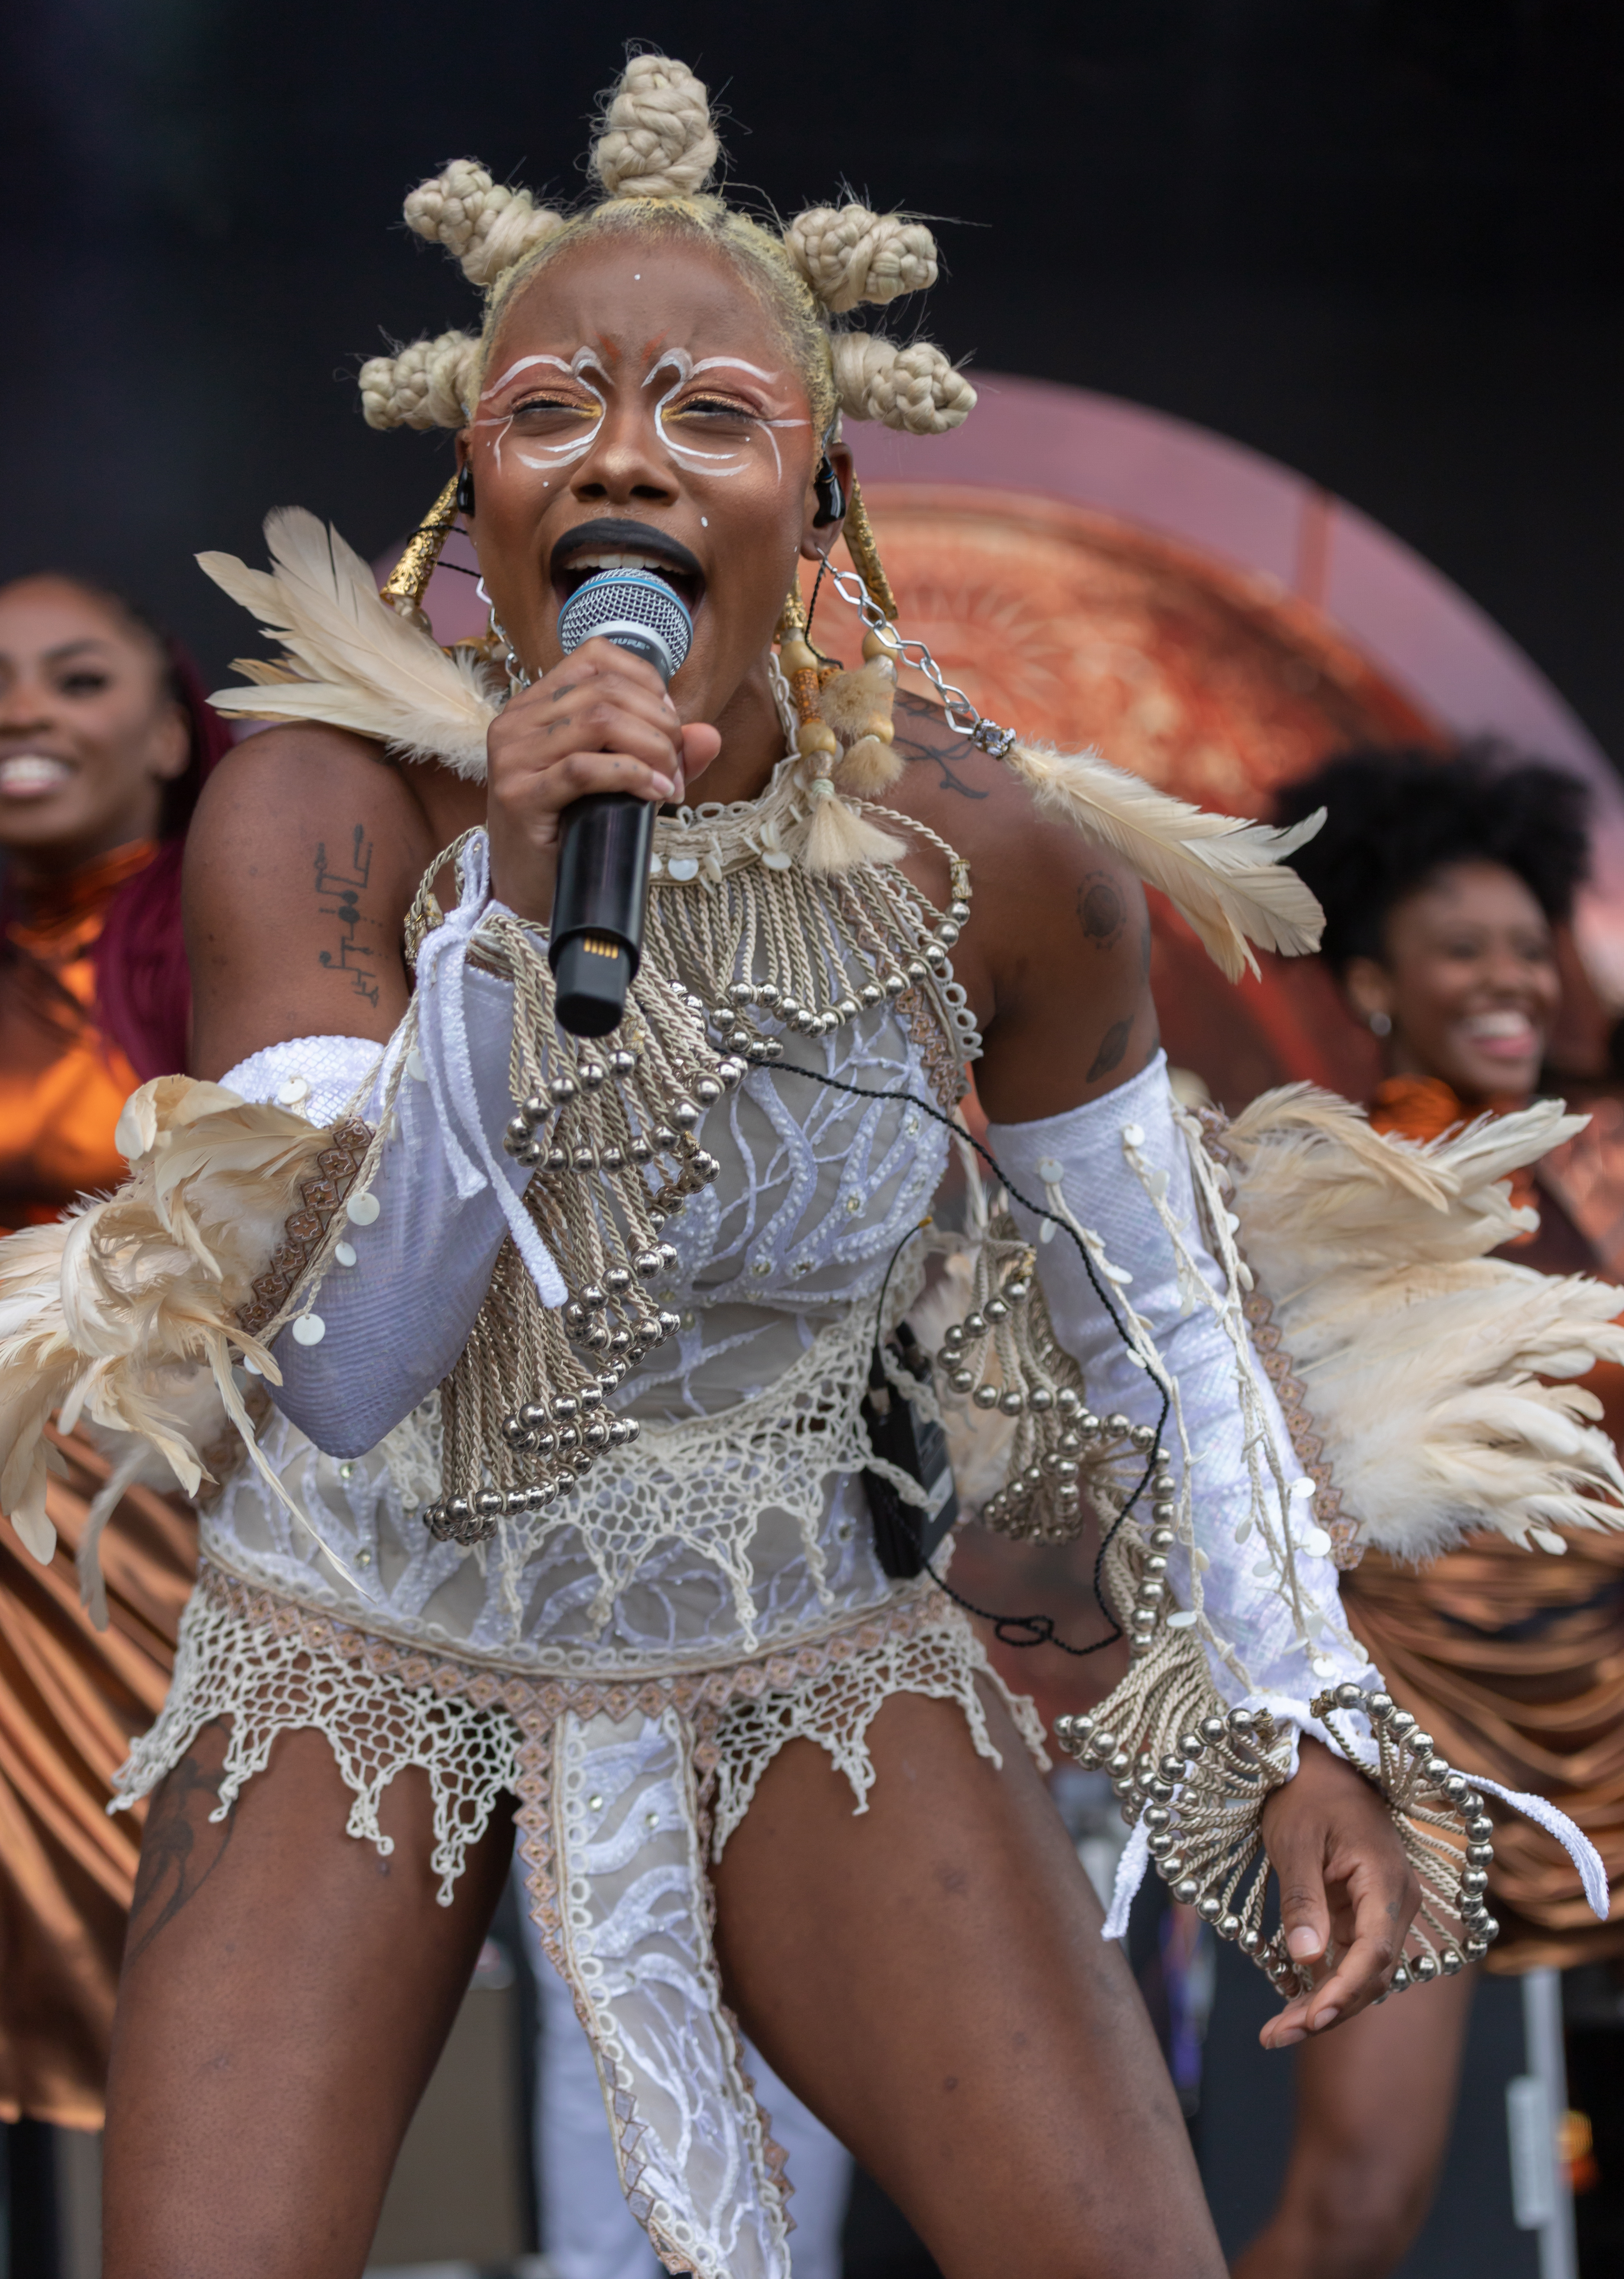 INIKO in an ornate costume performing on stage with backup singers in the background